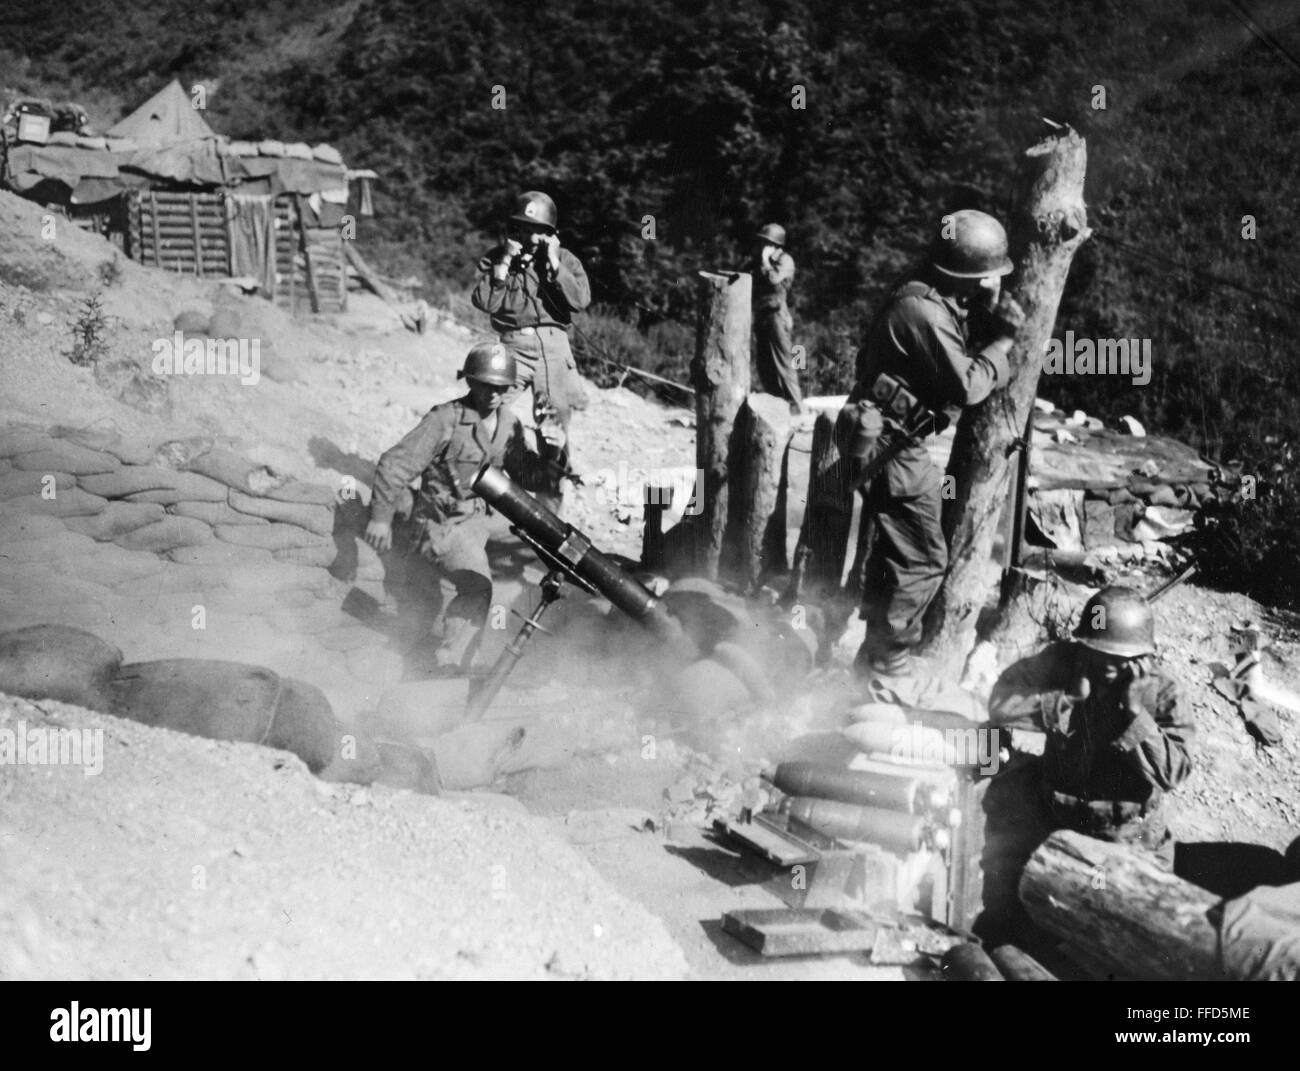 KOREAN WAR: ARTILLERY. /nAmerican soldiers firing a 4.2 inch mortar on the enemy at the Korean front. Stock Photo